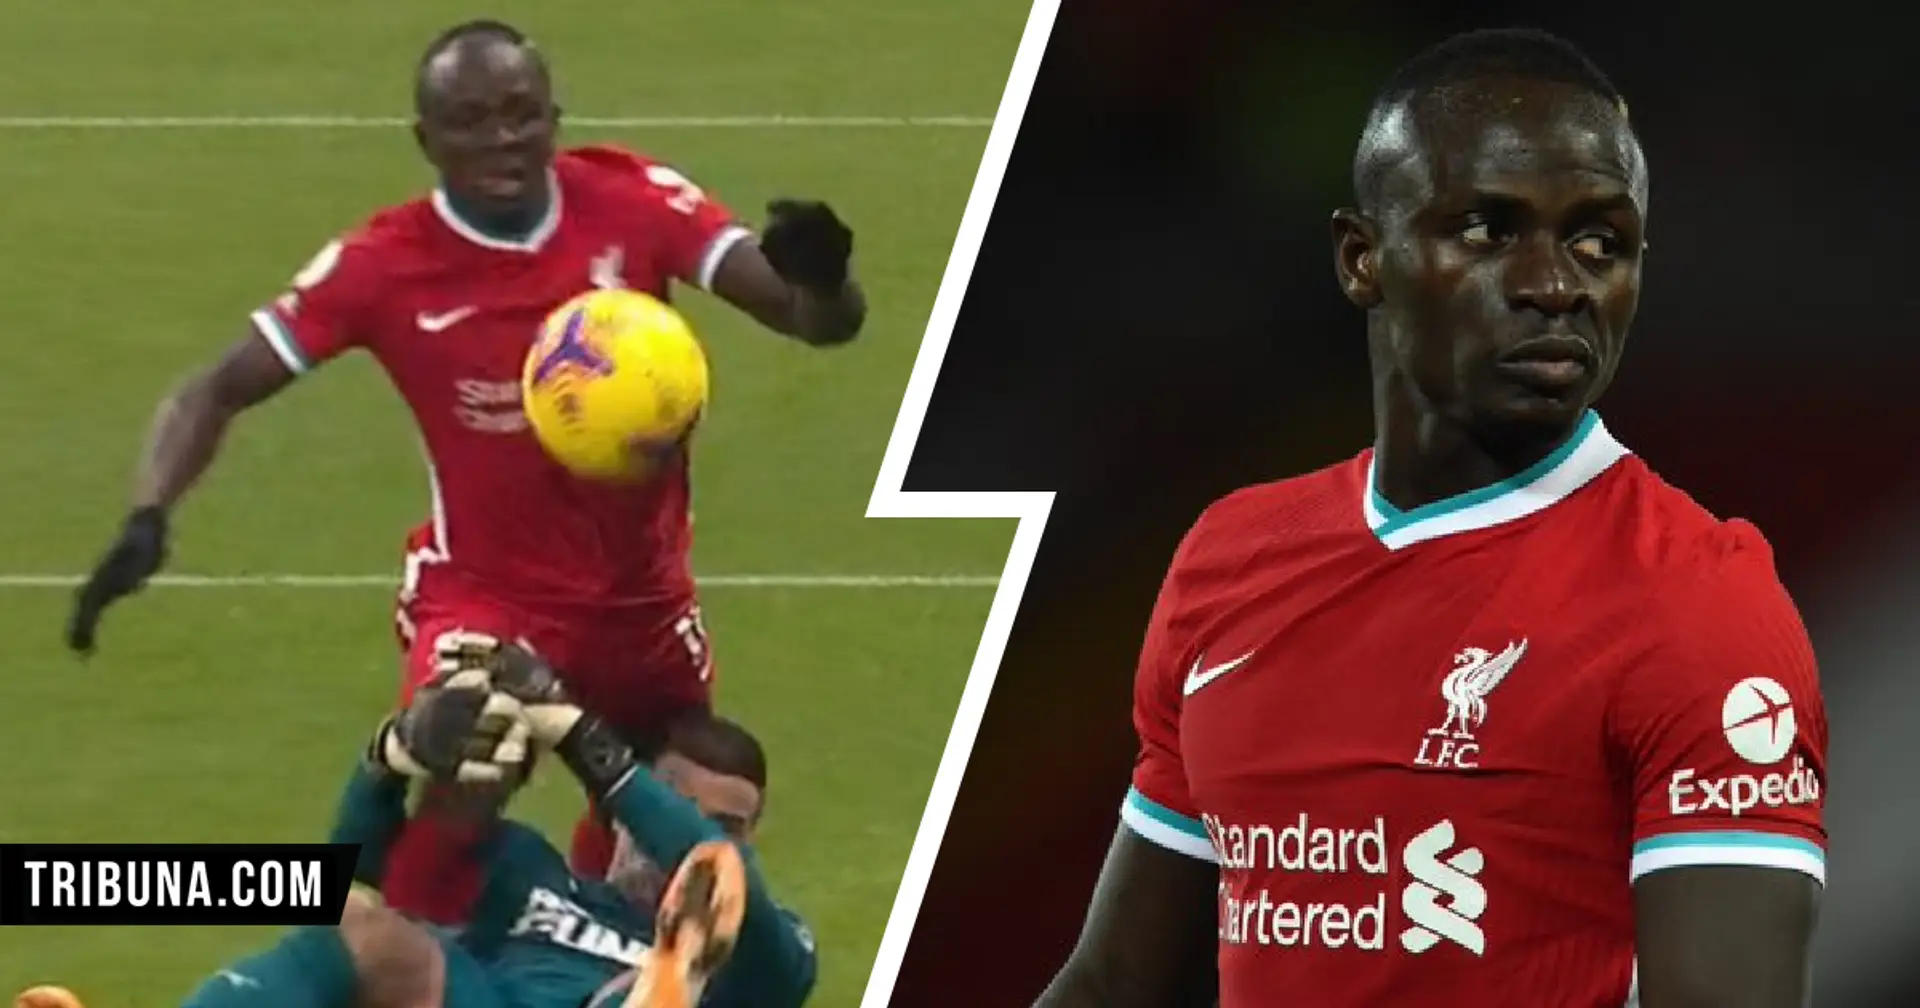 Replays show possible penalty call for Sadio Mane missed by VAR